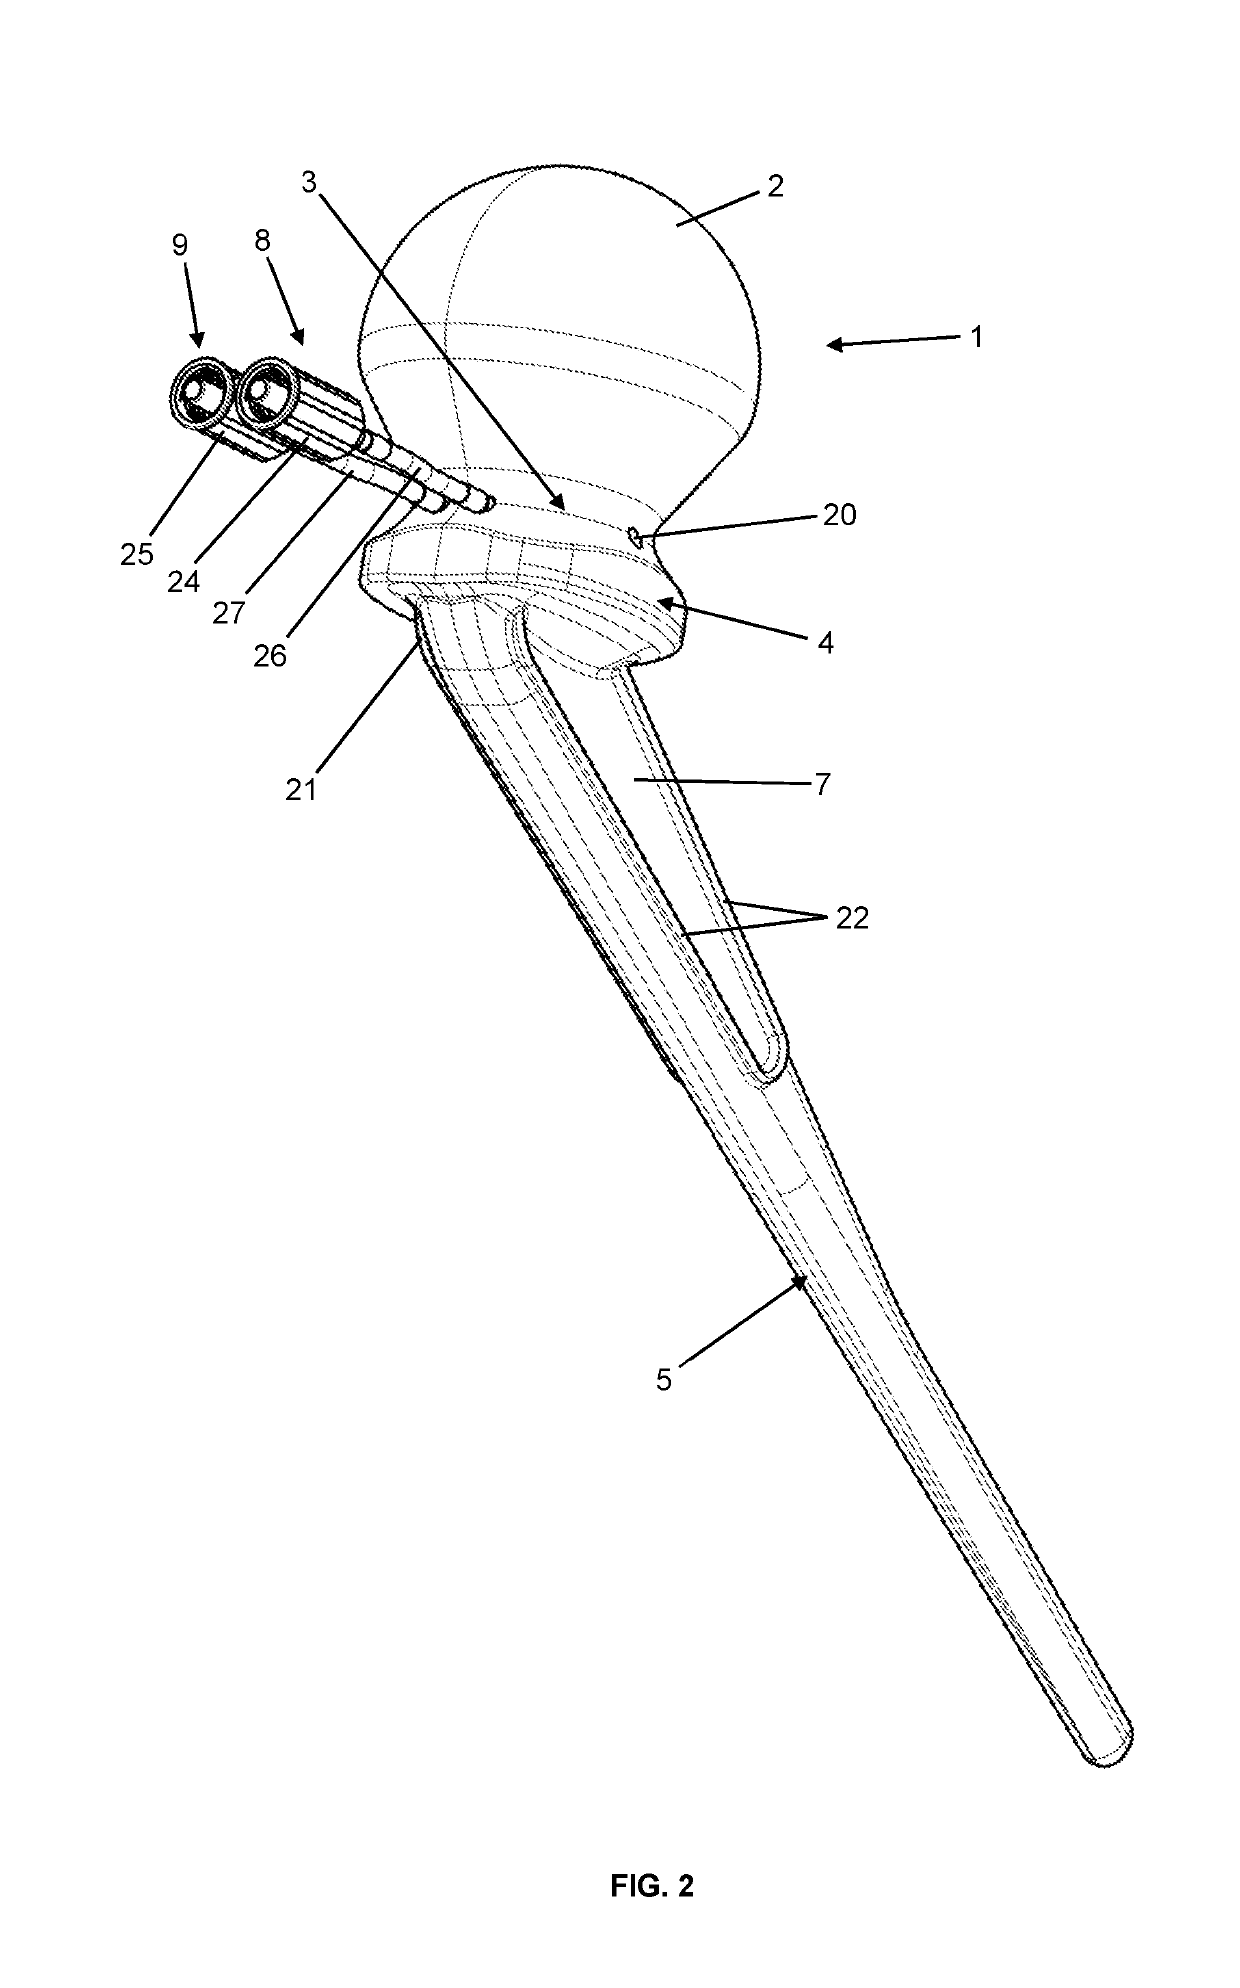 Femoral hip joint spacer with irrigation device